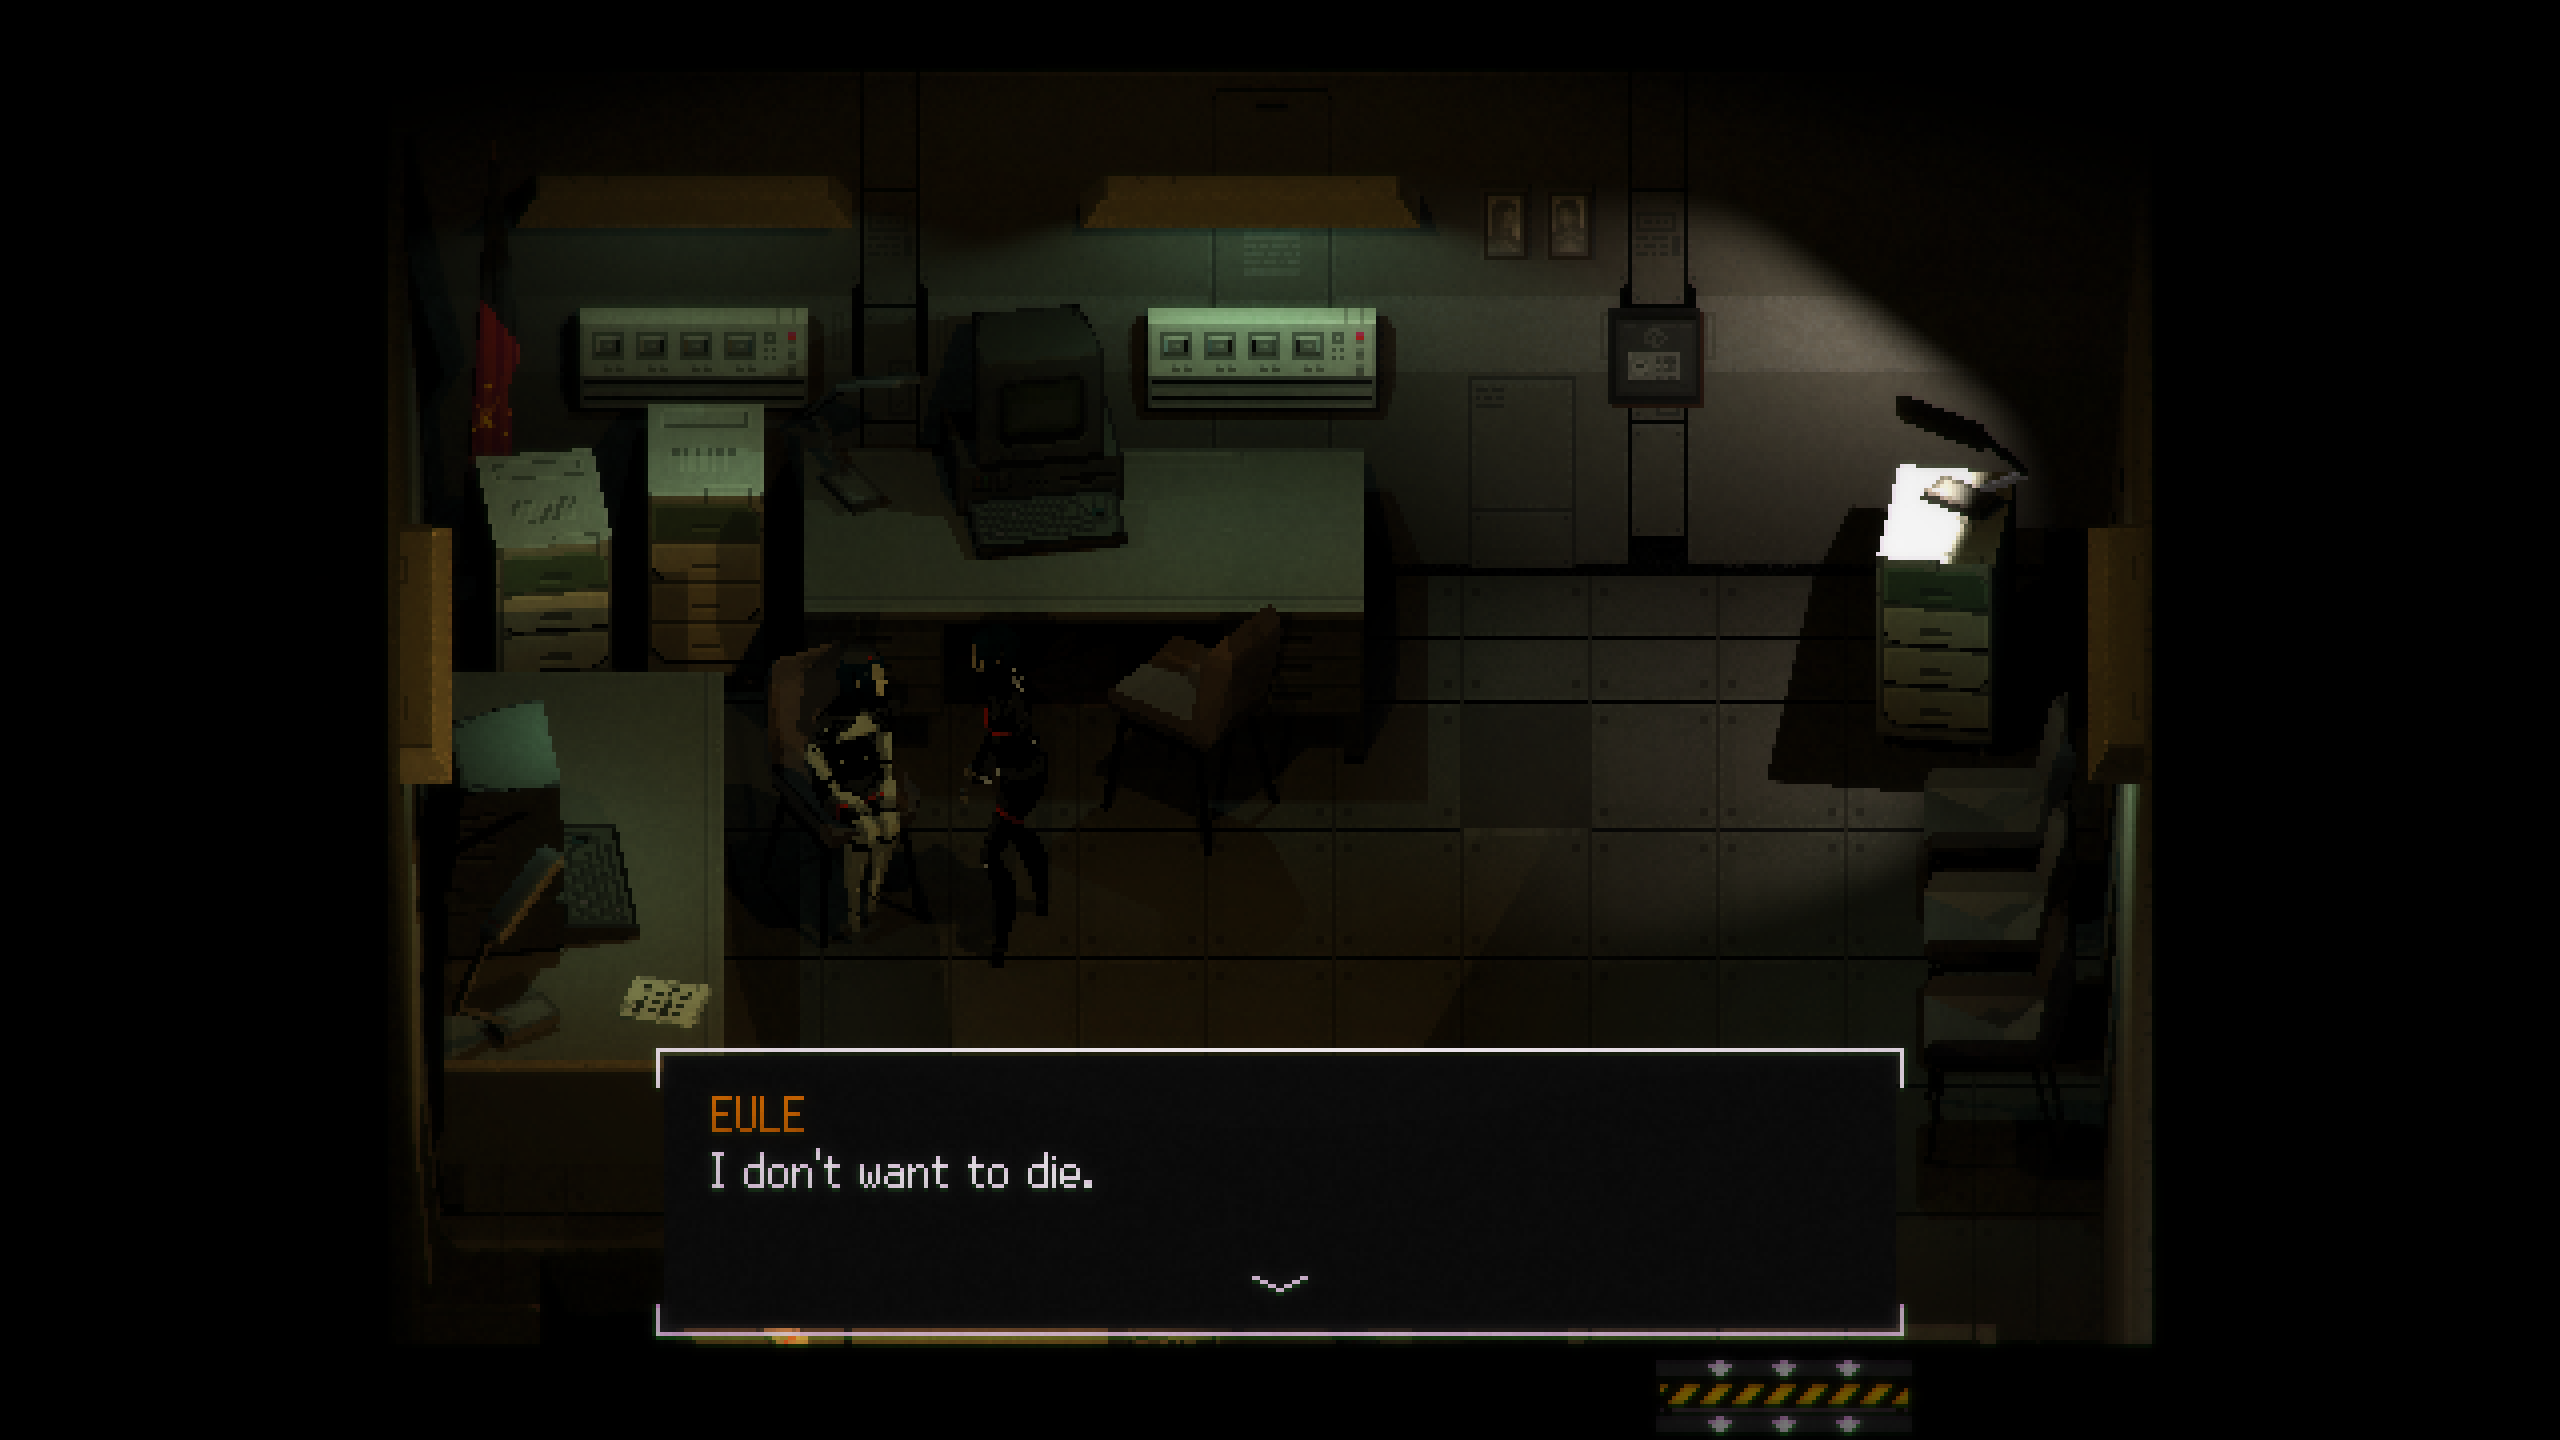 An android expresses a desire not to die in a Signalis screenshot.